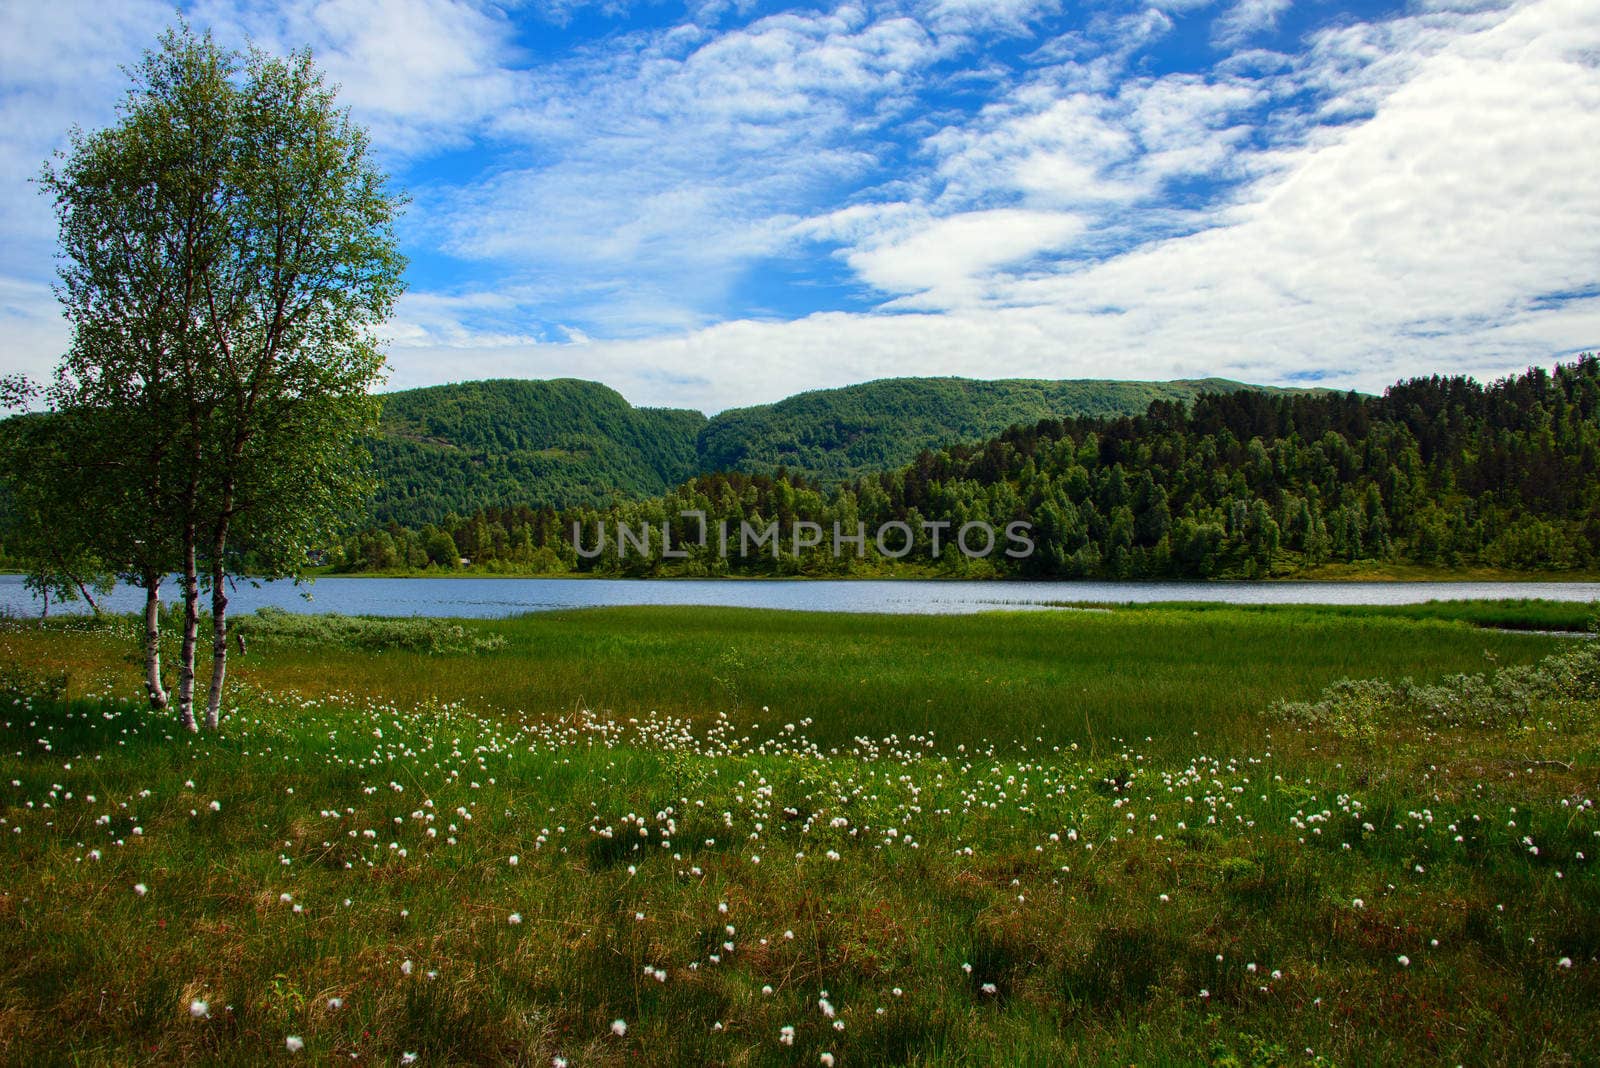 Summer image from the mountains with cotton grass, wetland and a lake